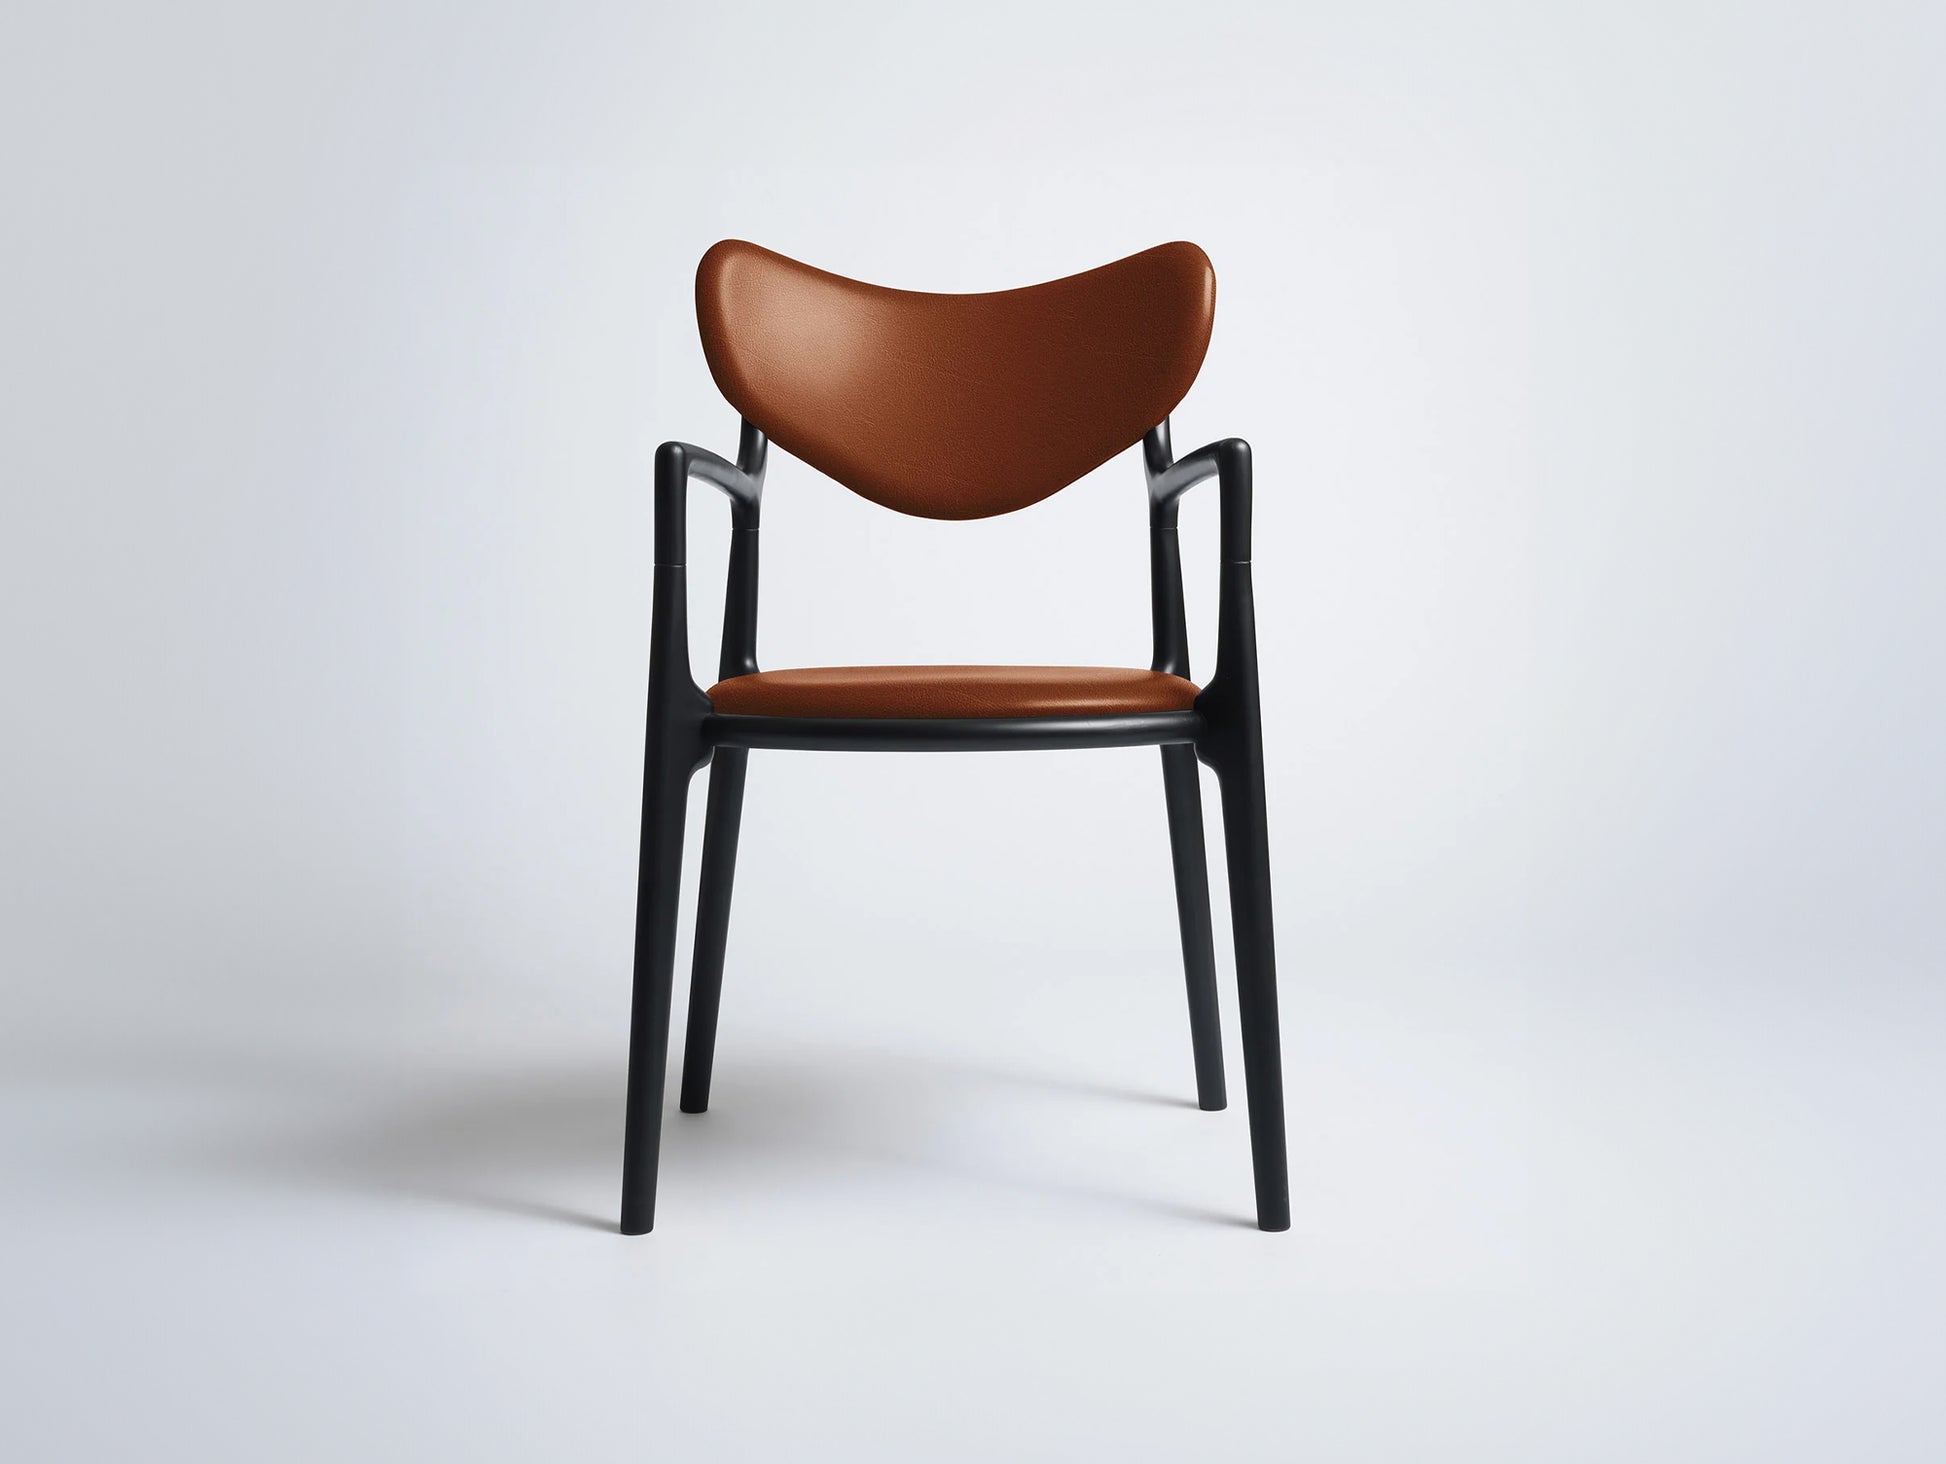 Salon Chair by Ro Collection - Black Lacquered Beech / Exclusive Rio Cognac Leather